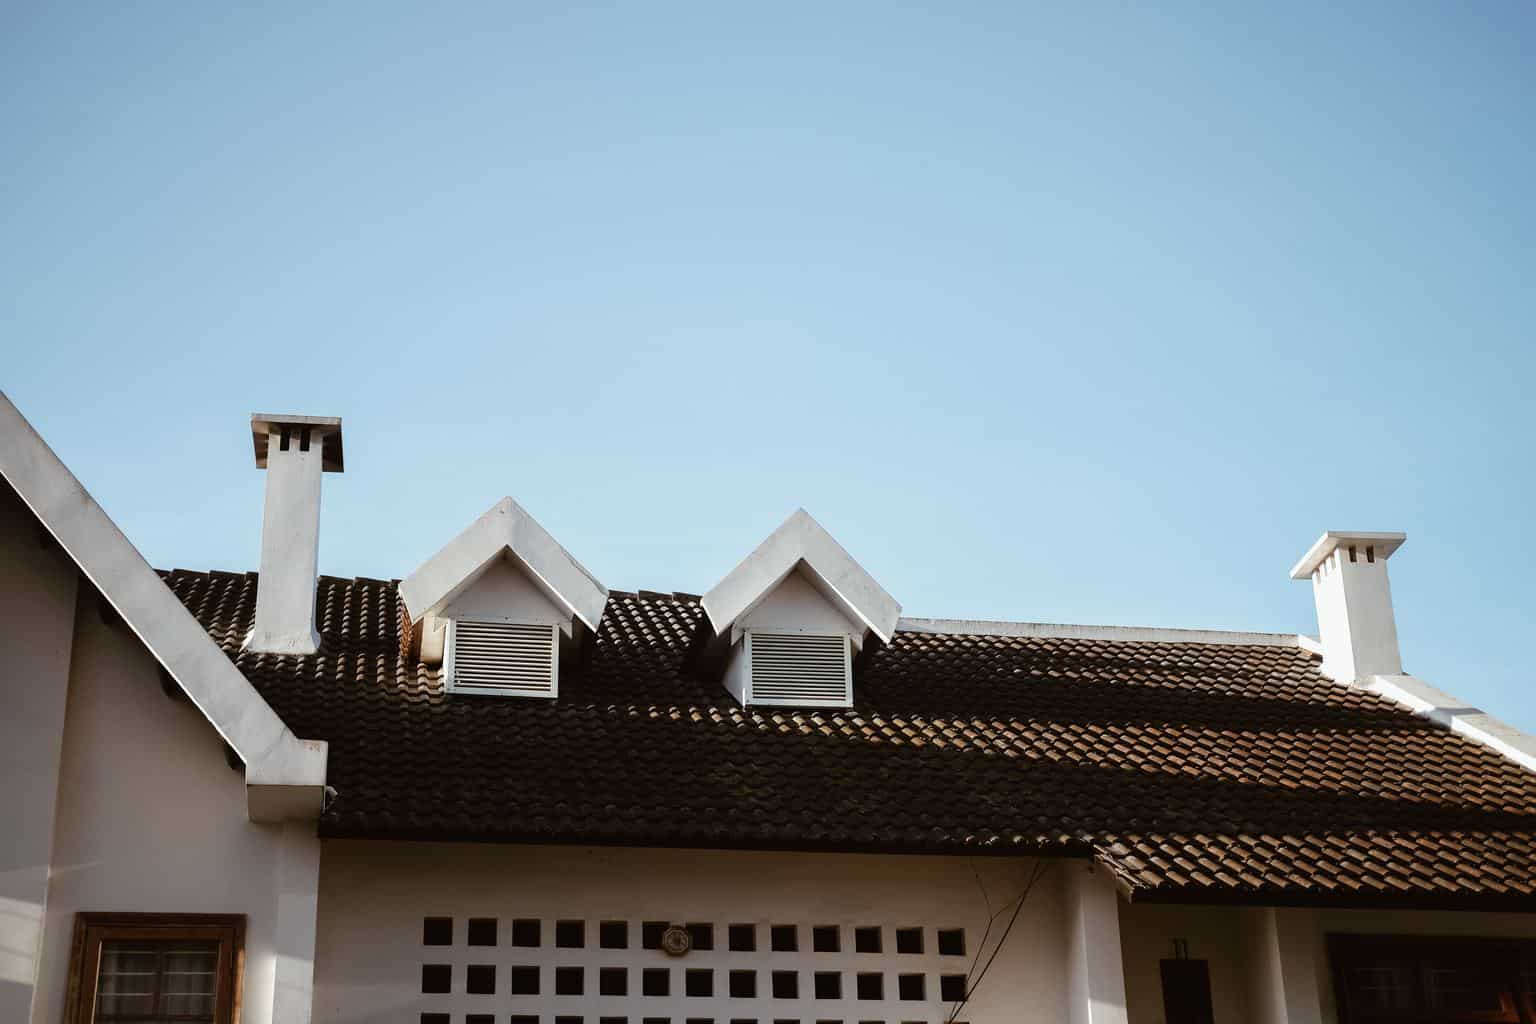 Image shows a black shingled roof, on a white home